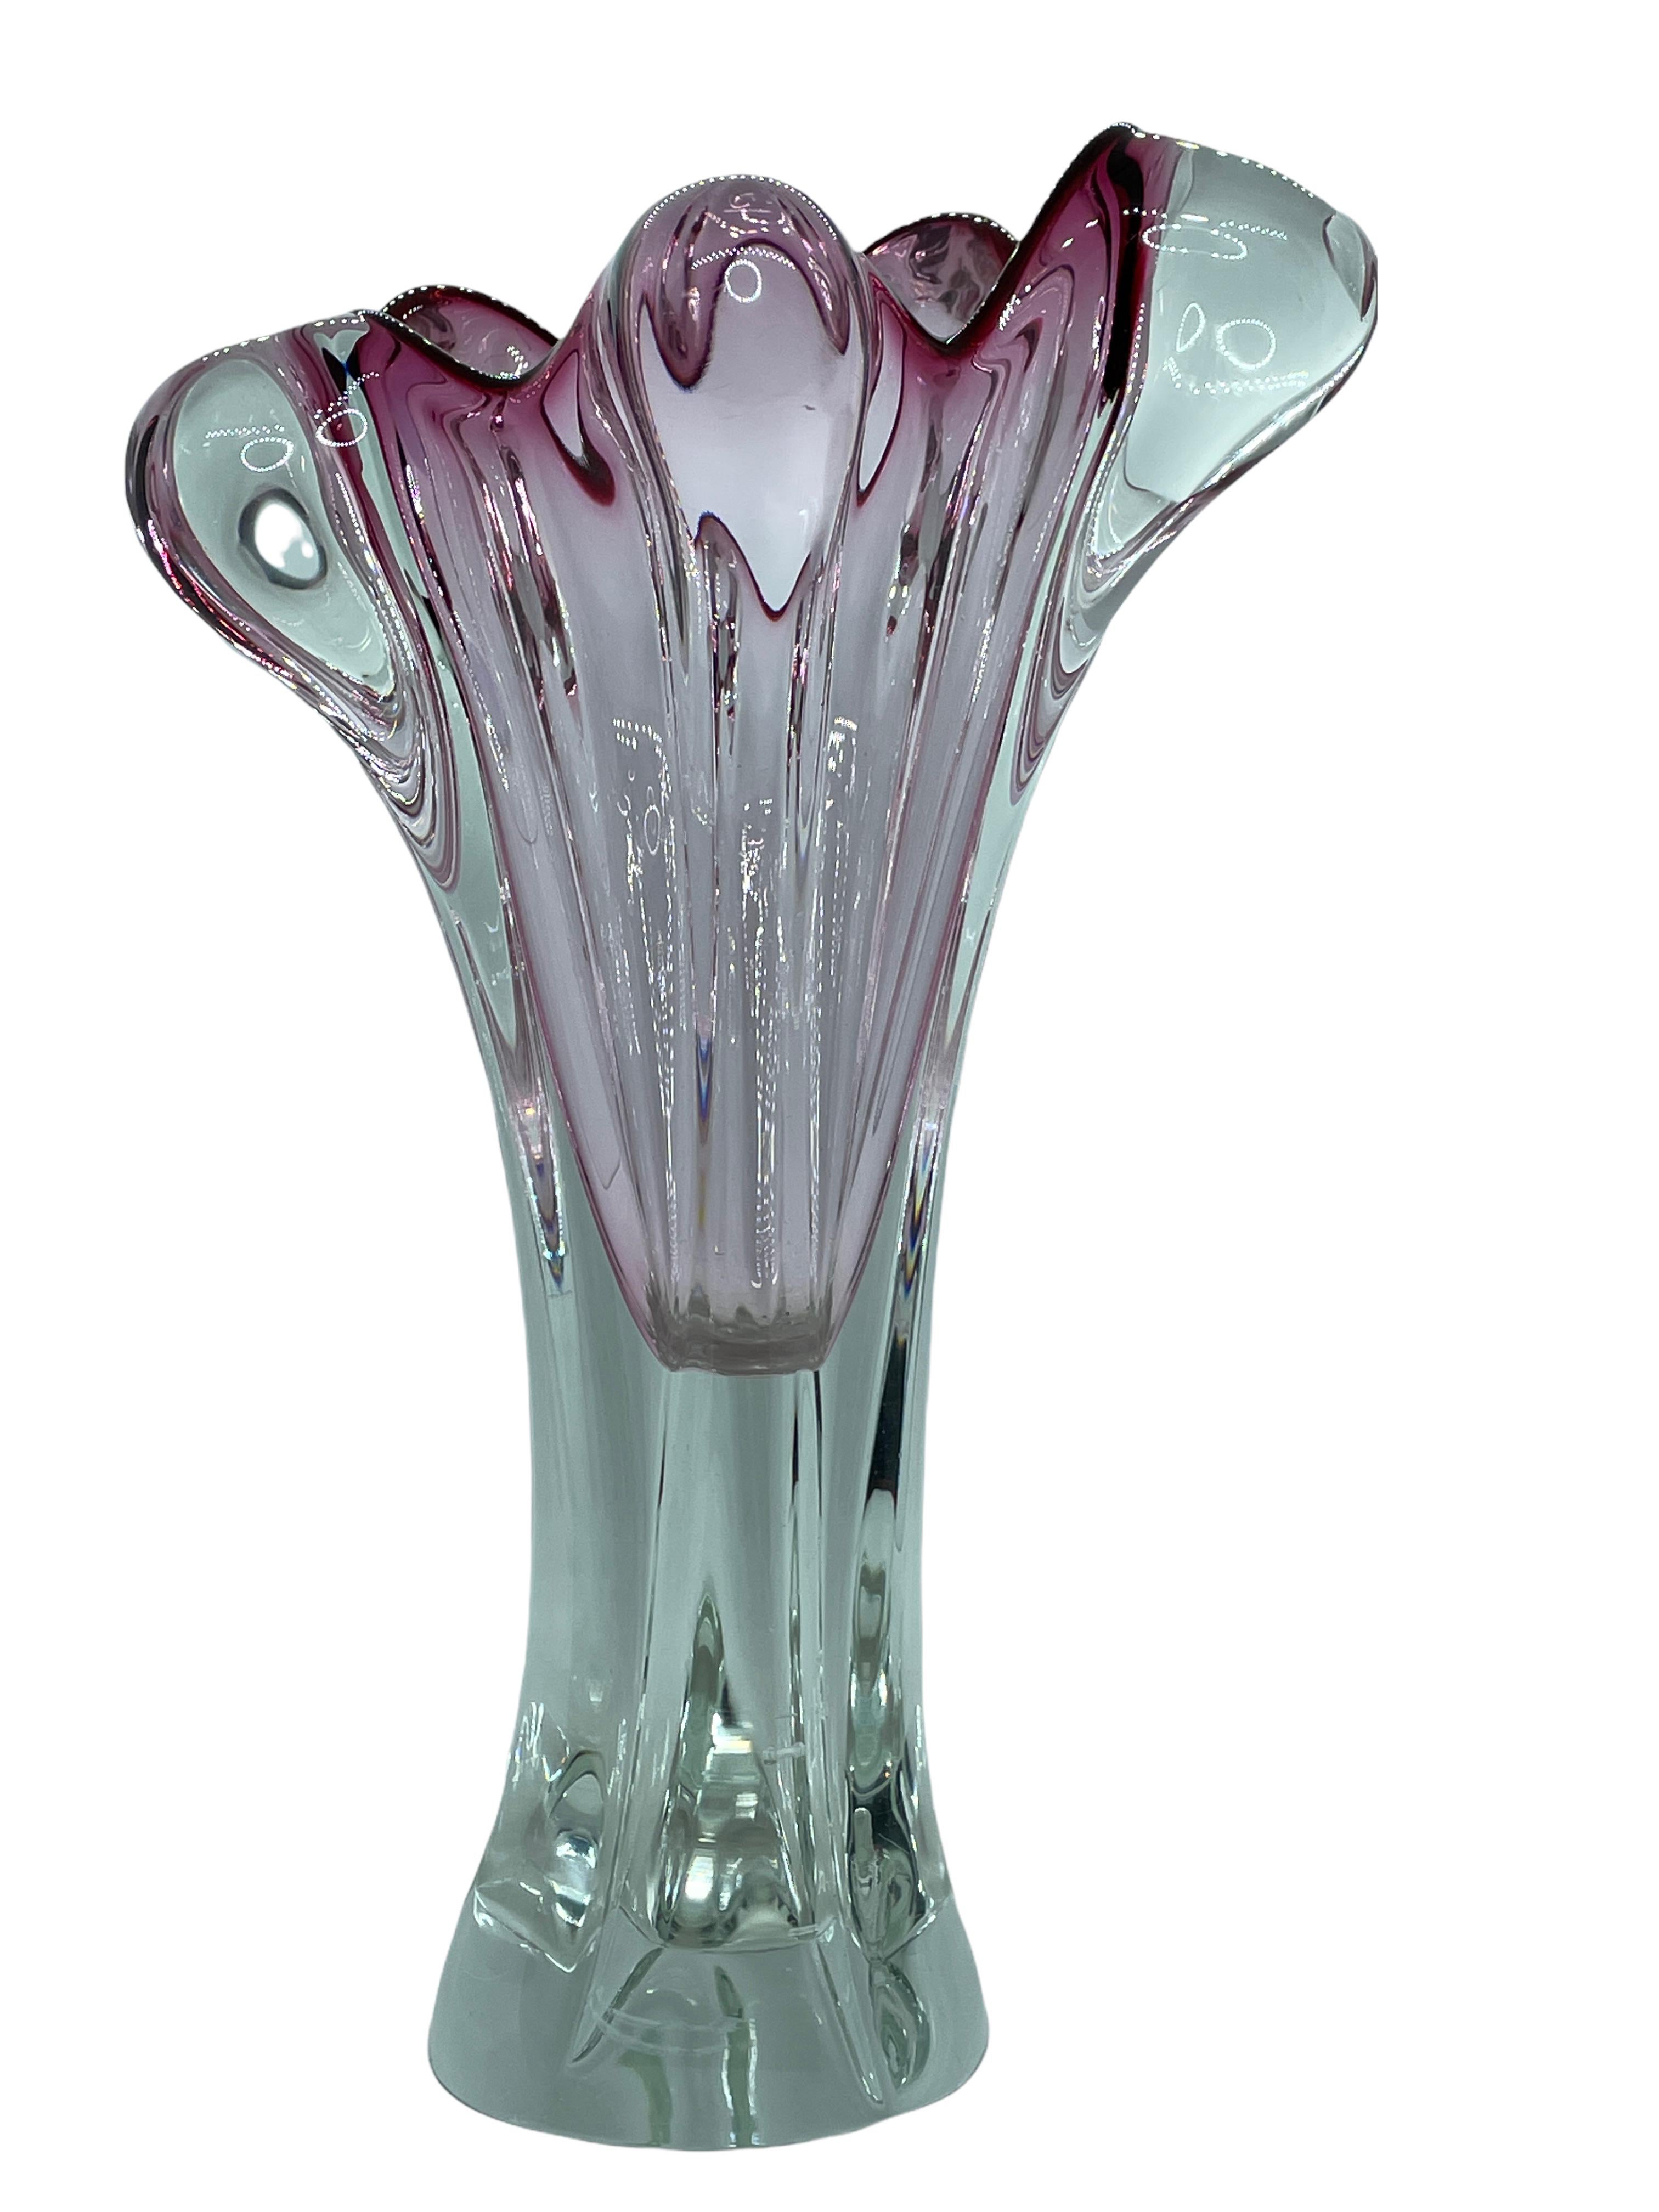 Italian Pink and Clear Sommerso Art Glass Vase Object Sculpture Murano, Italy, 1970s